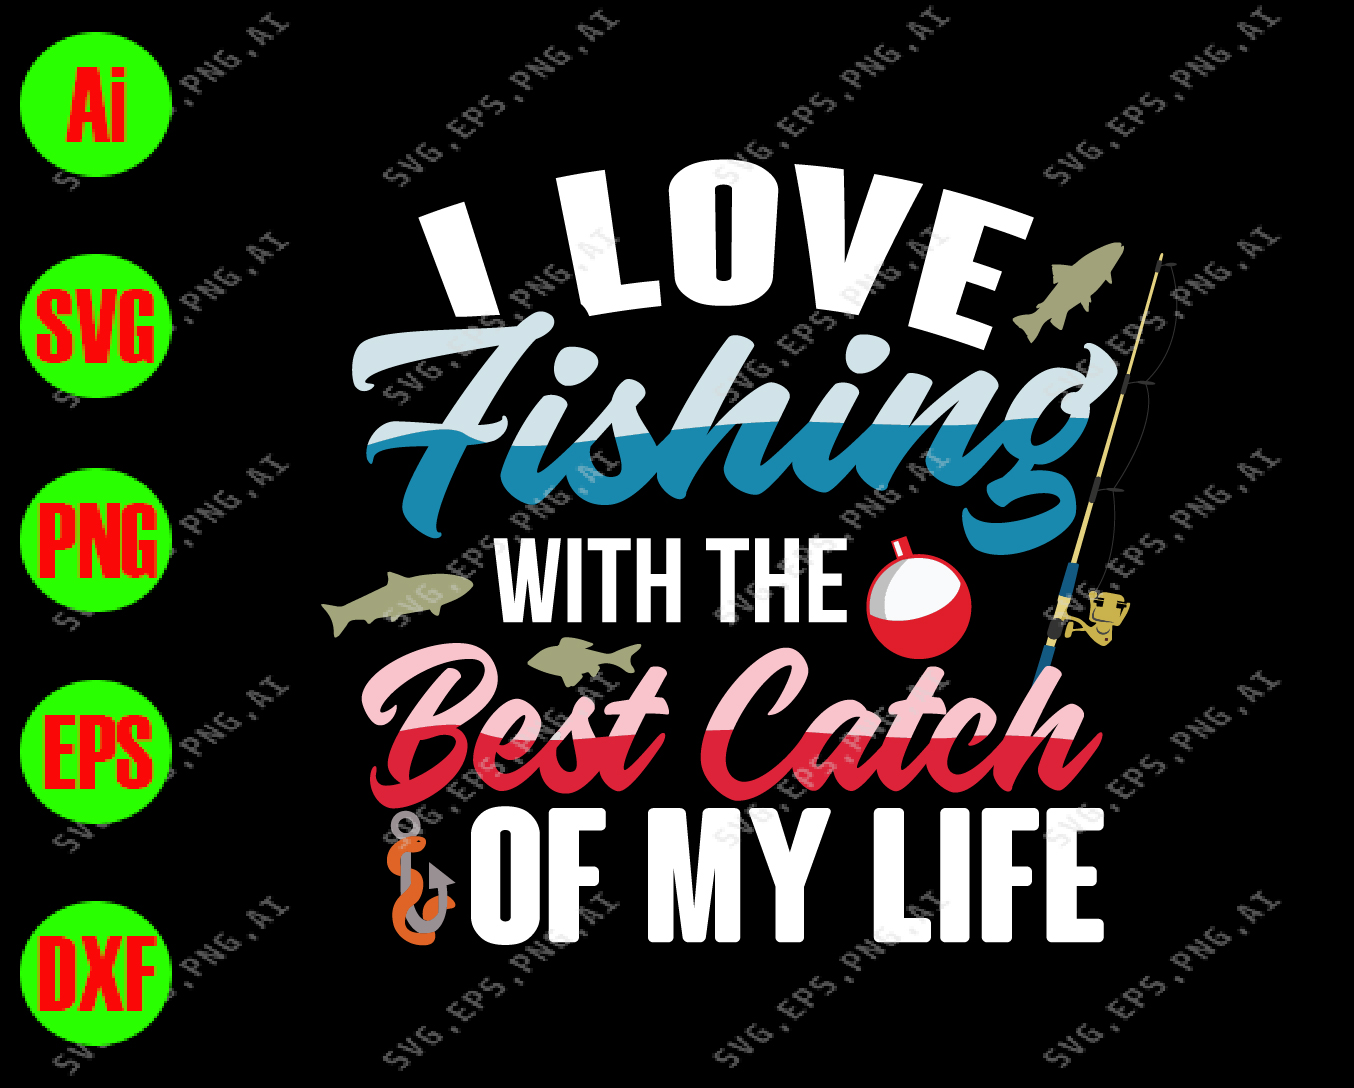 Download I love fishing with the best catch of my life svg, dxf,eps ...